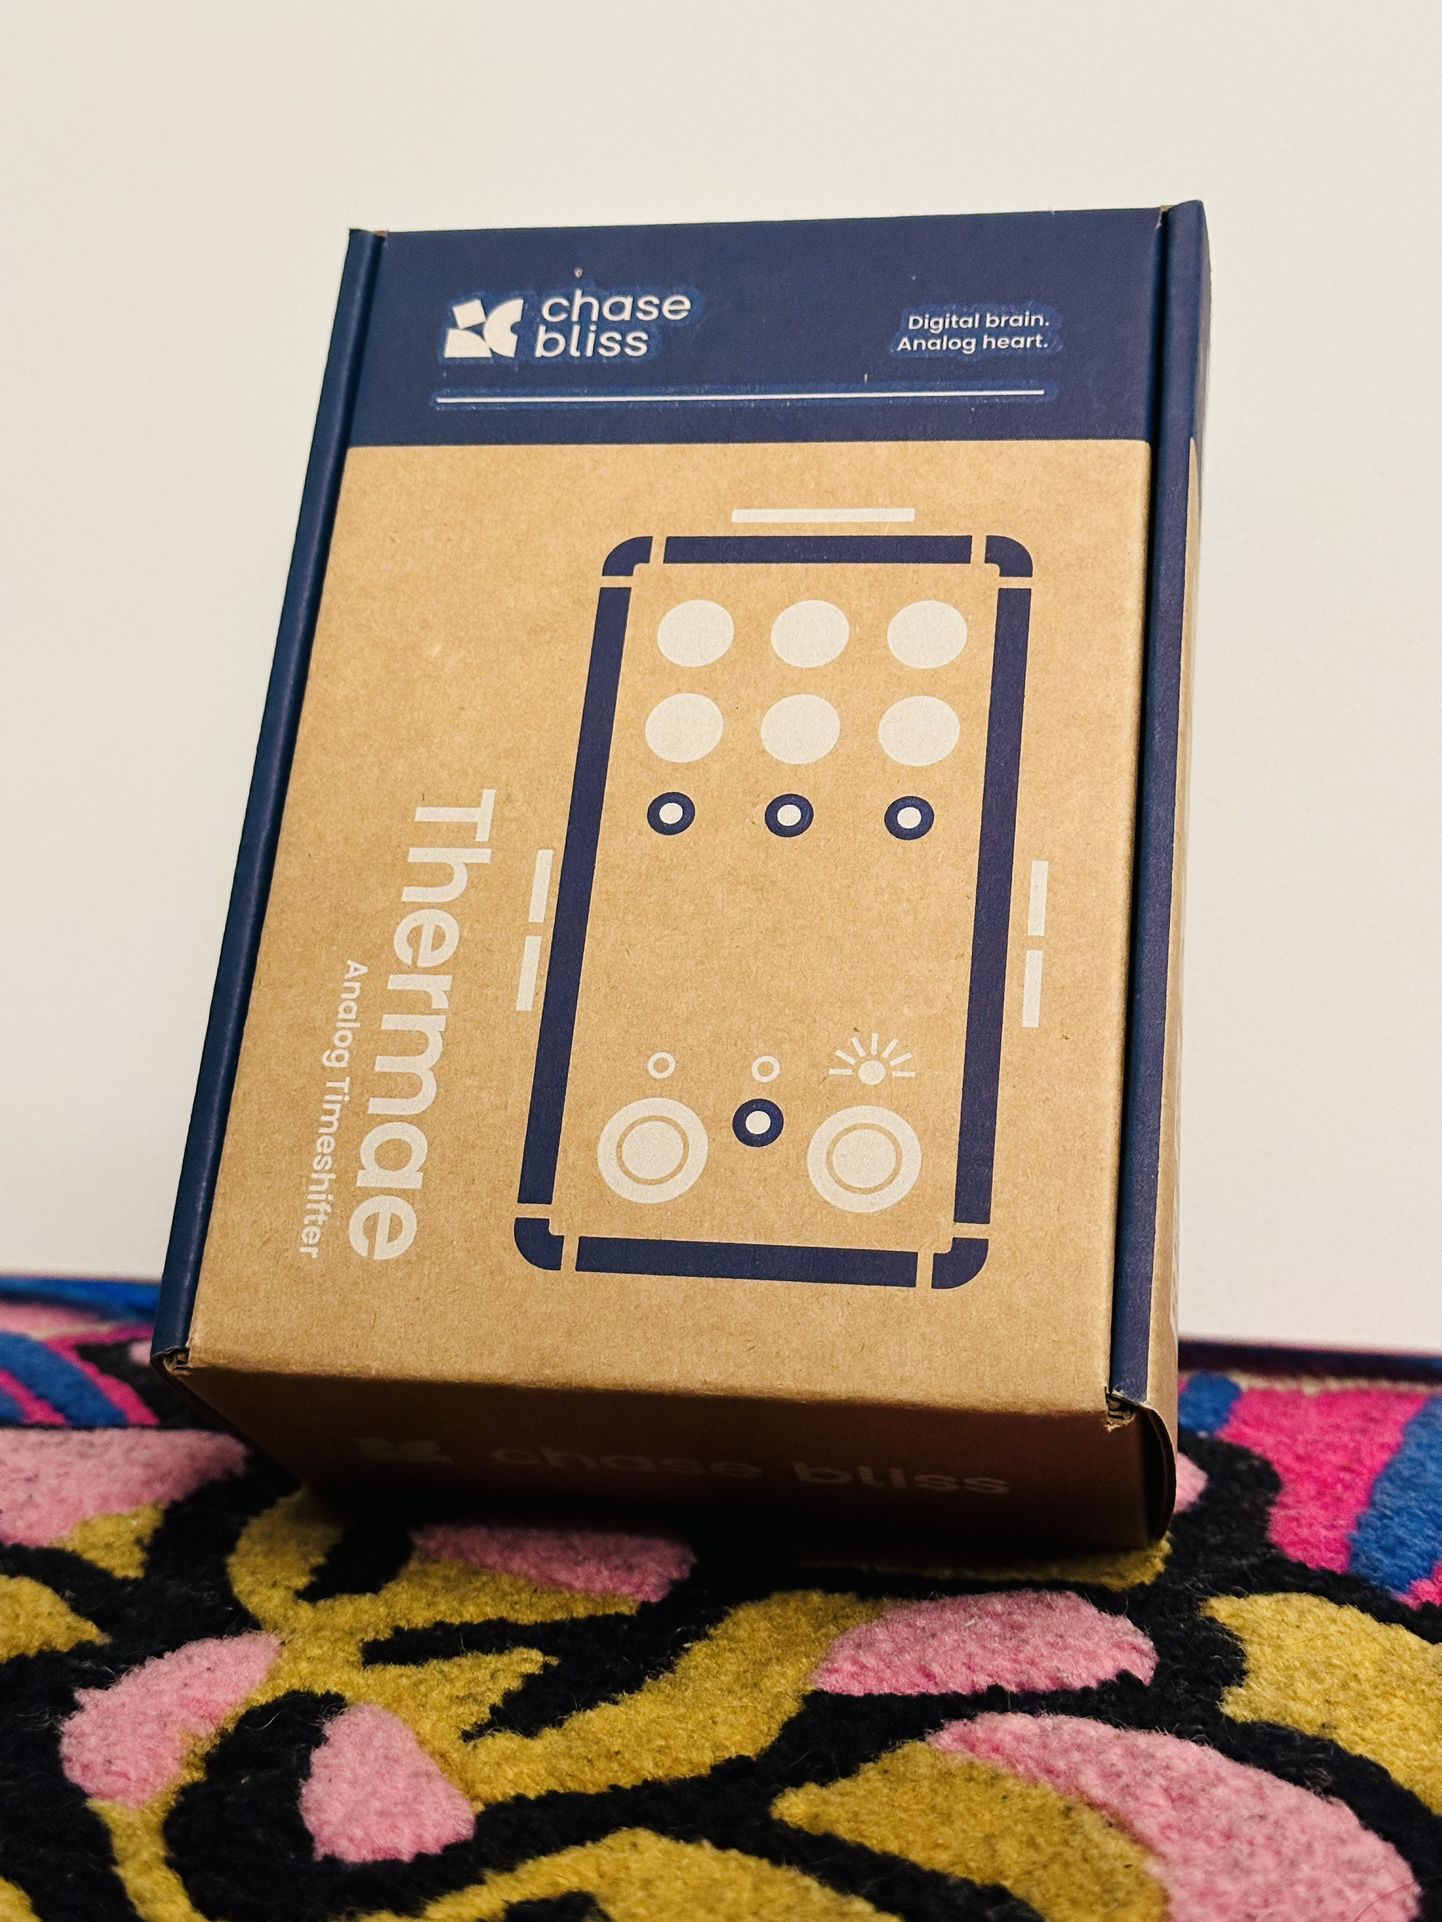 Chasebliss Audio Thermae Delay Unopened $435 